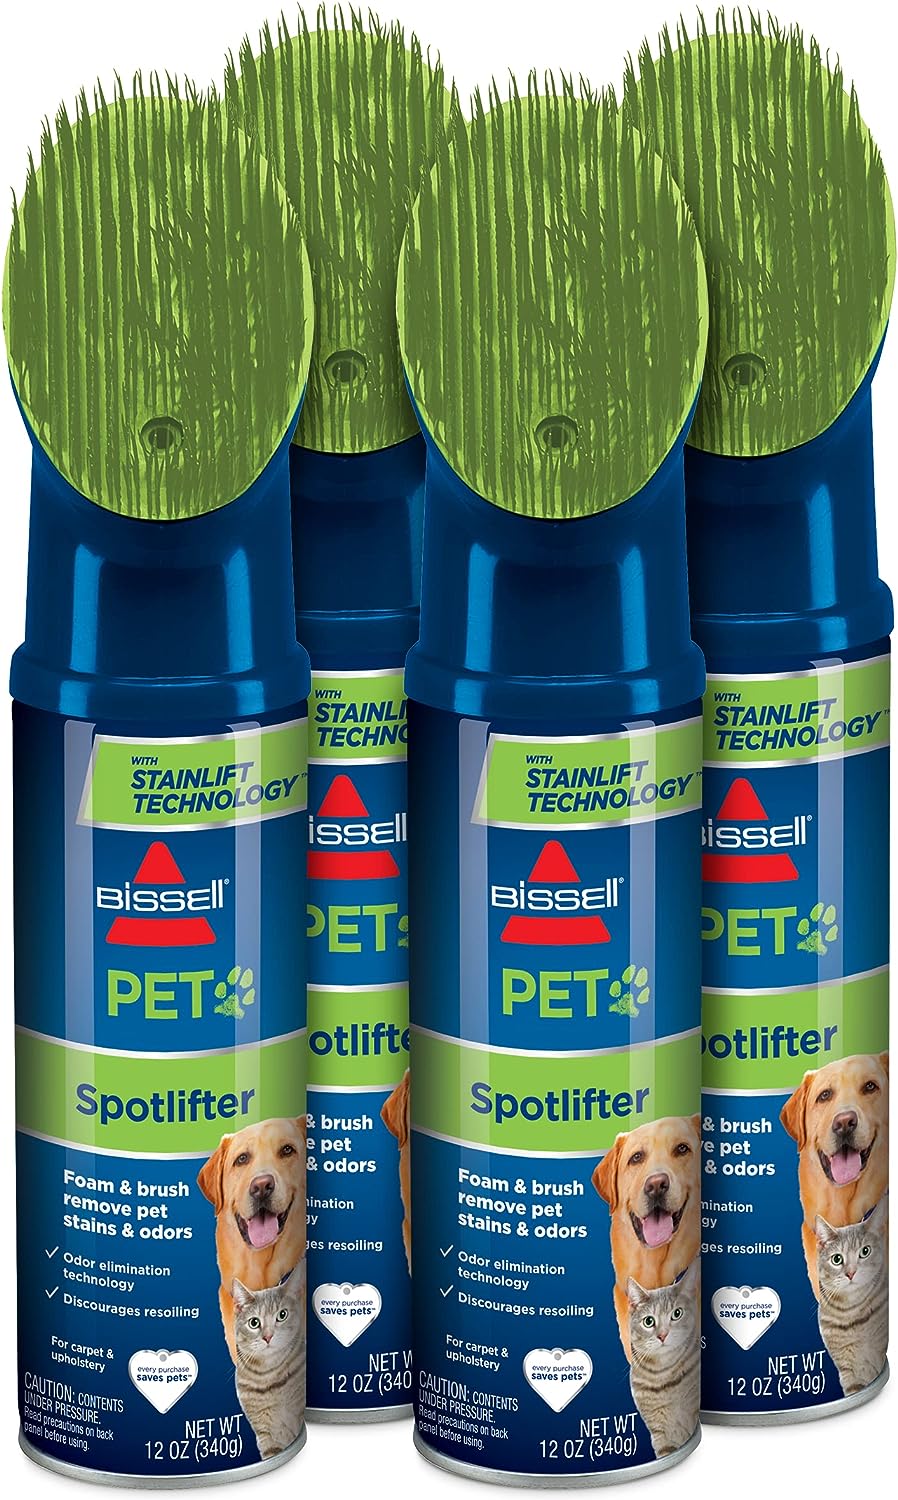 Bissell Spotlifter Pet Carpet and Upholstery Cleaner [...]